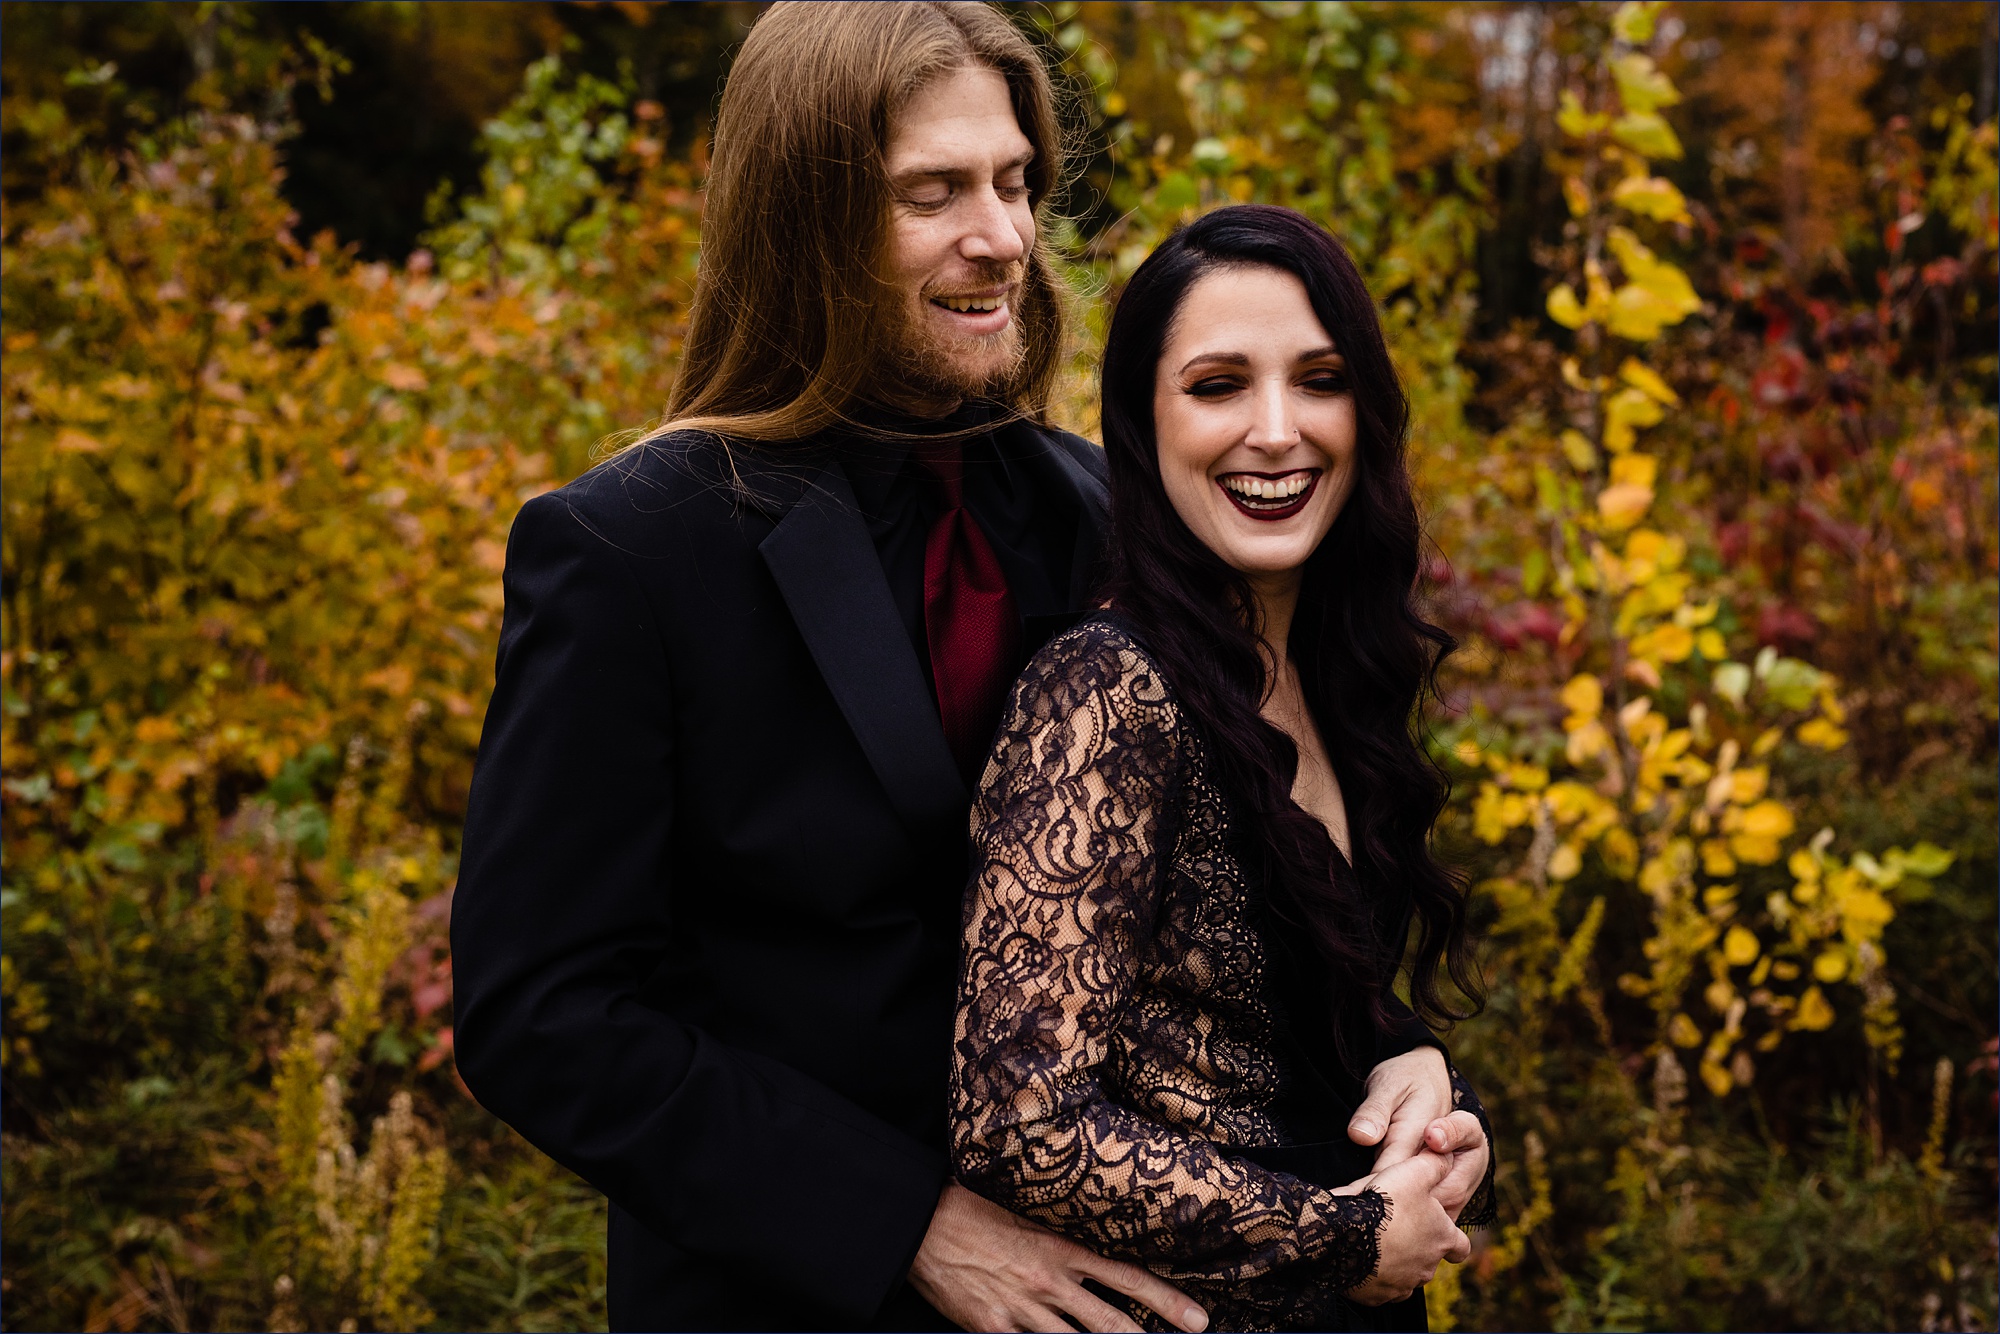 The bride and groom smile together in the fall colored trees for their Halloween inspired New Hampshire wedding day